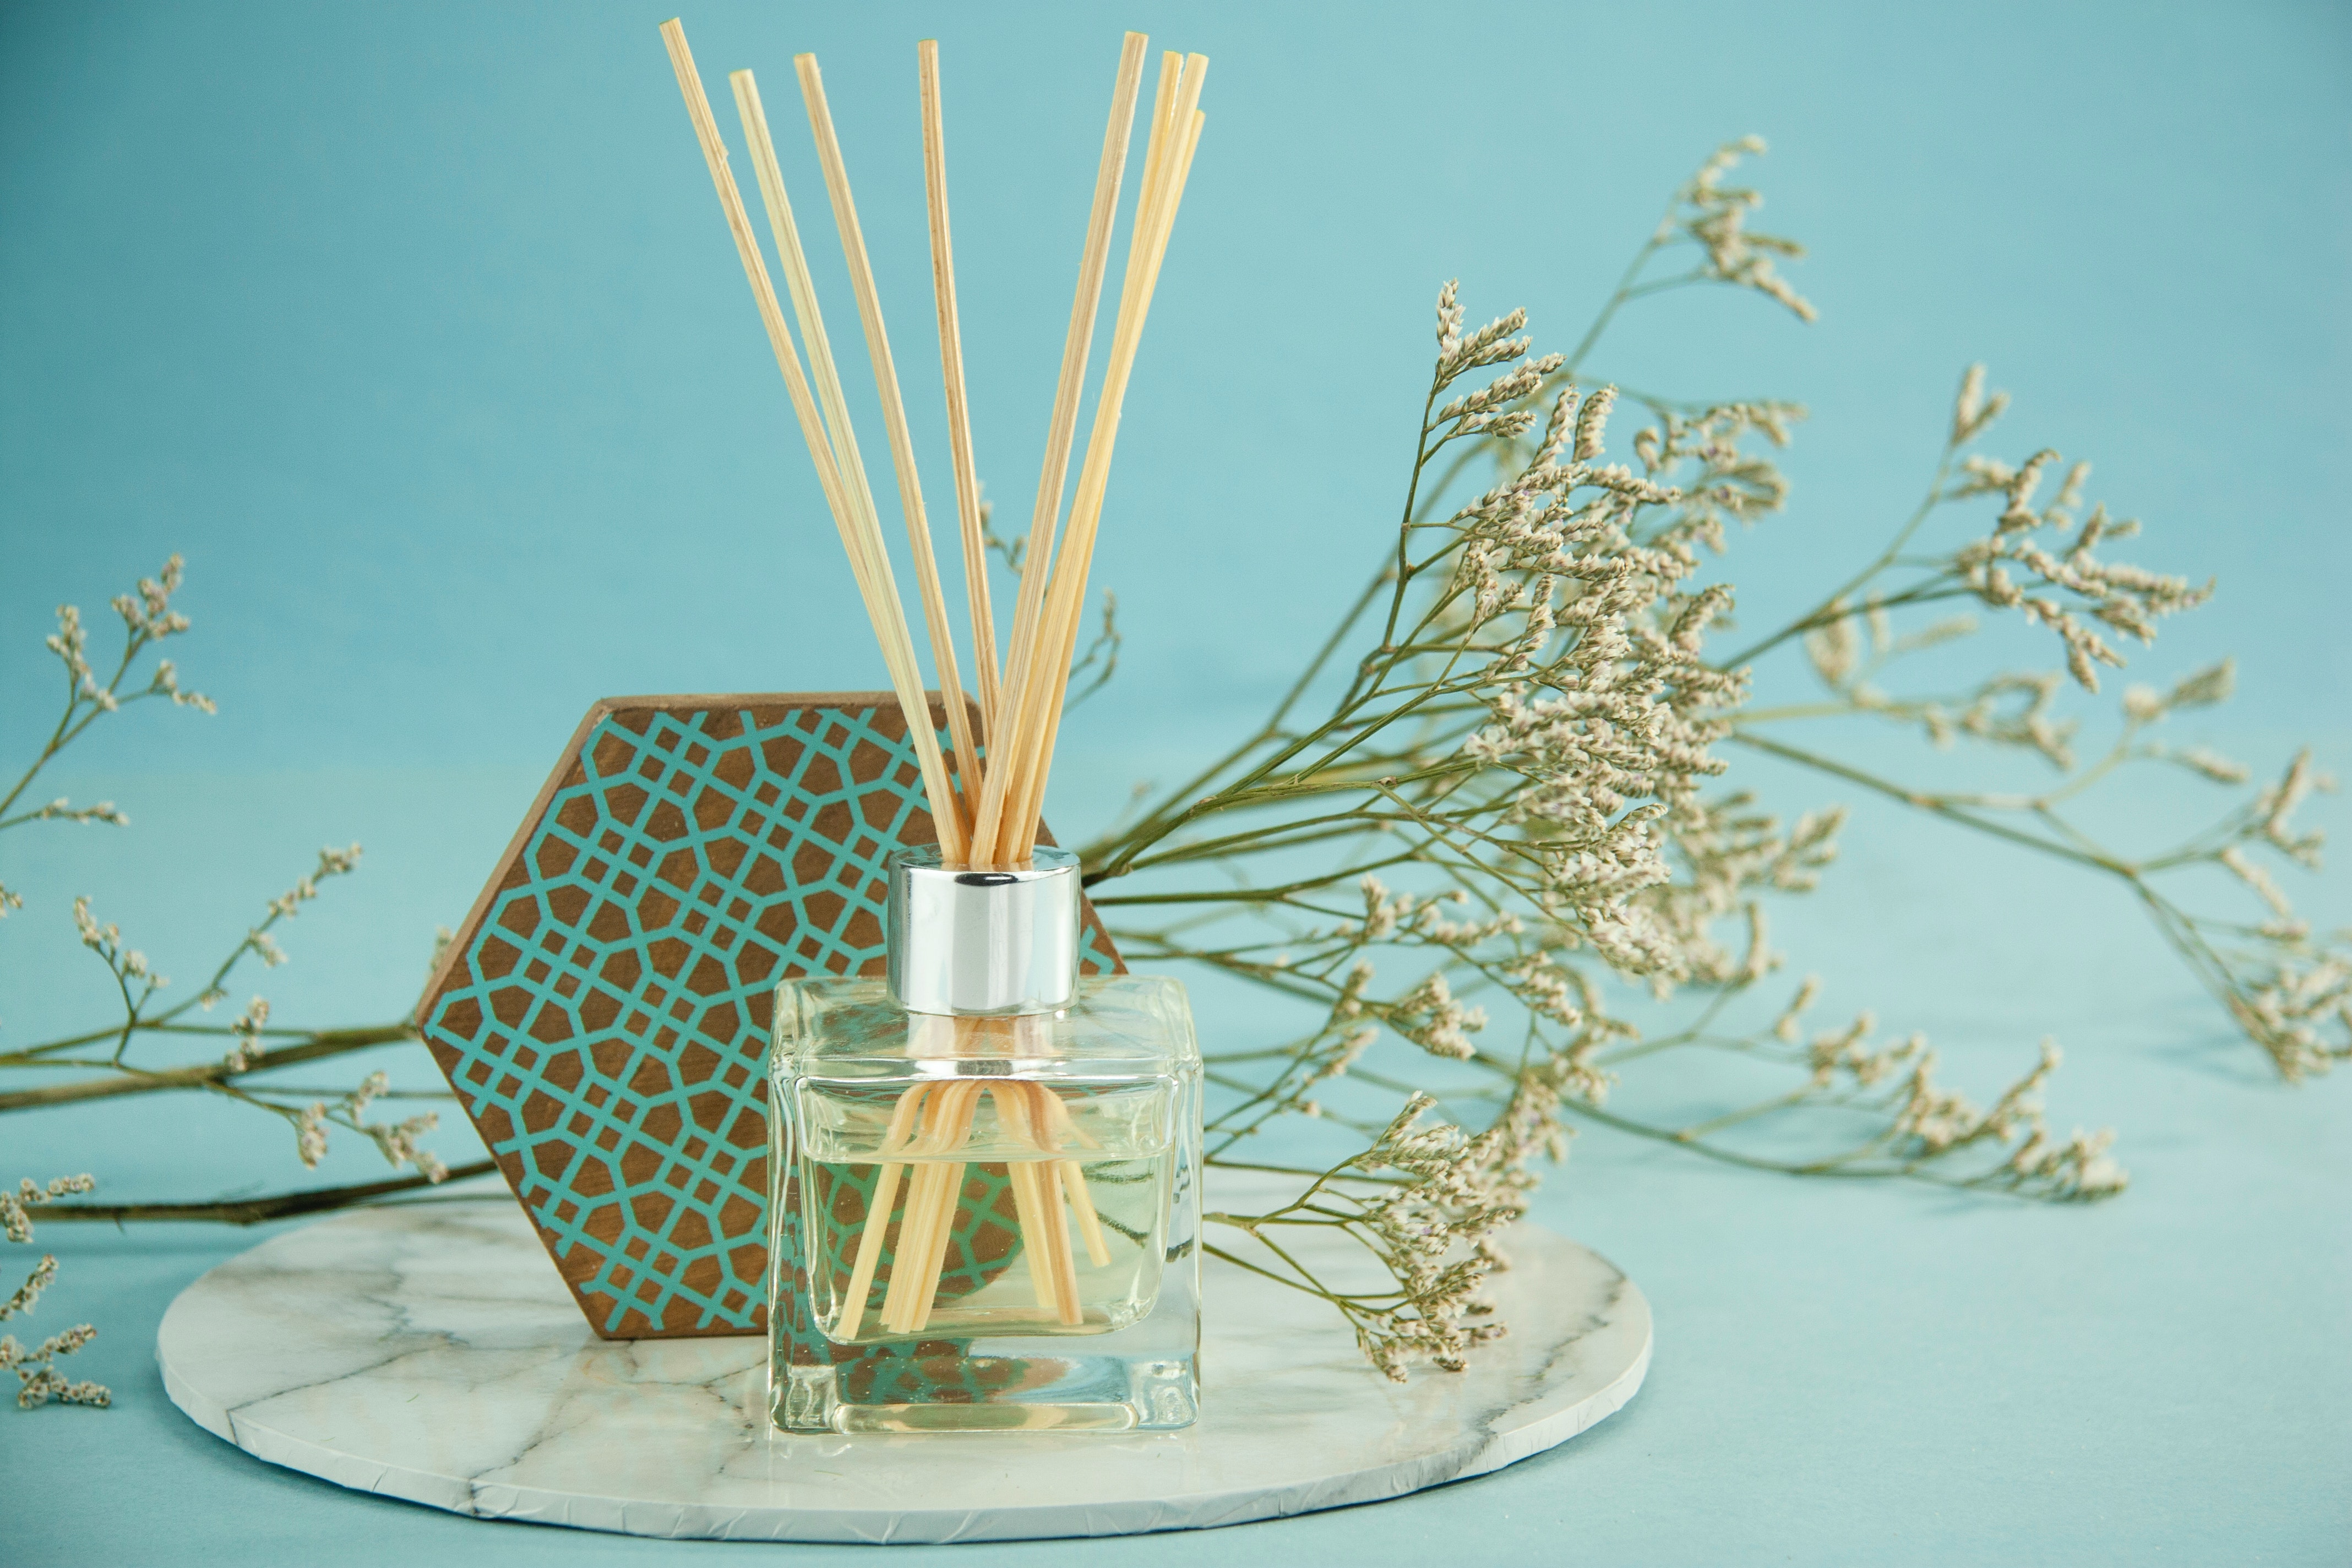 An Aromatherapy Diffuser And Essential Oils - A Great Way To Relax And Unwind